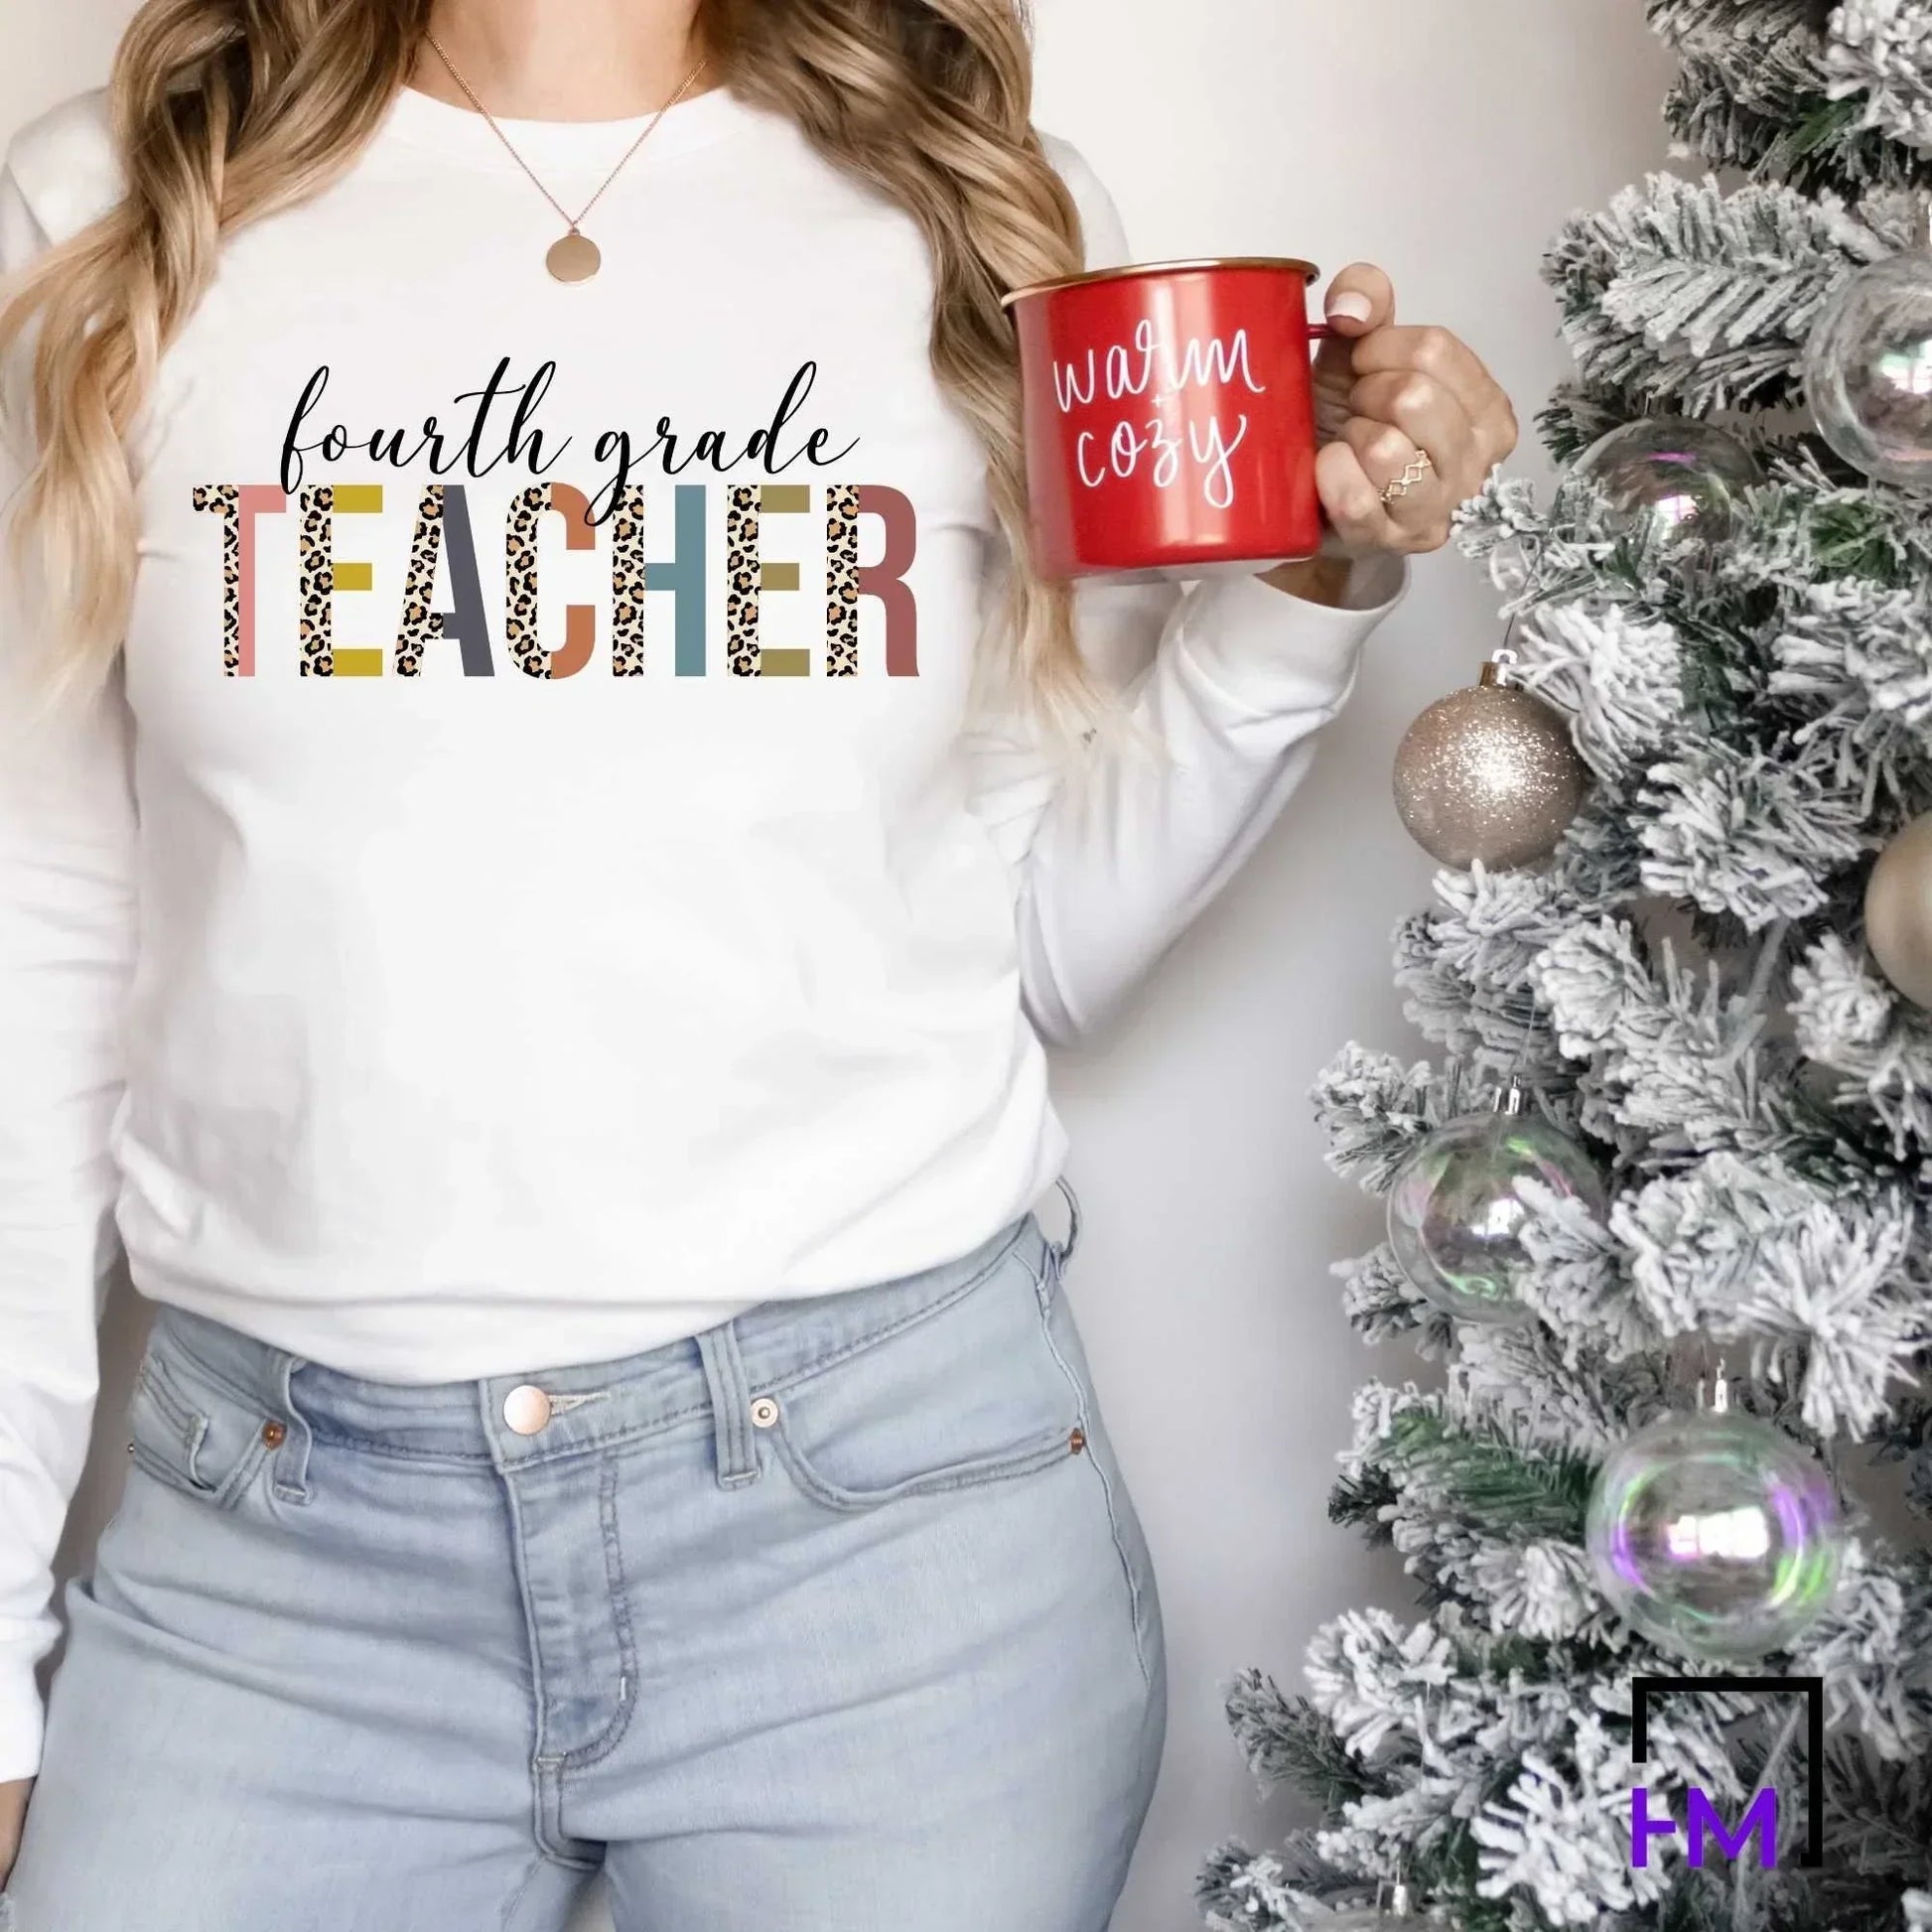 4th Grade Teacher Shirt | Great for New Middle School Team, Appreciation Gifts, Back to School, Holiday Celebration, Christmas Presents Gift HMDesignStudioUS